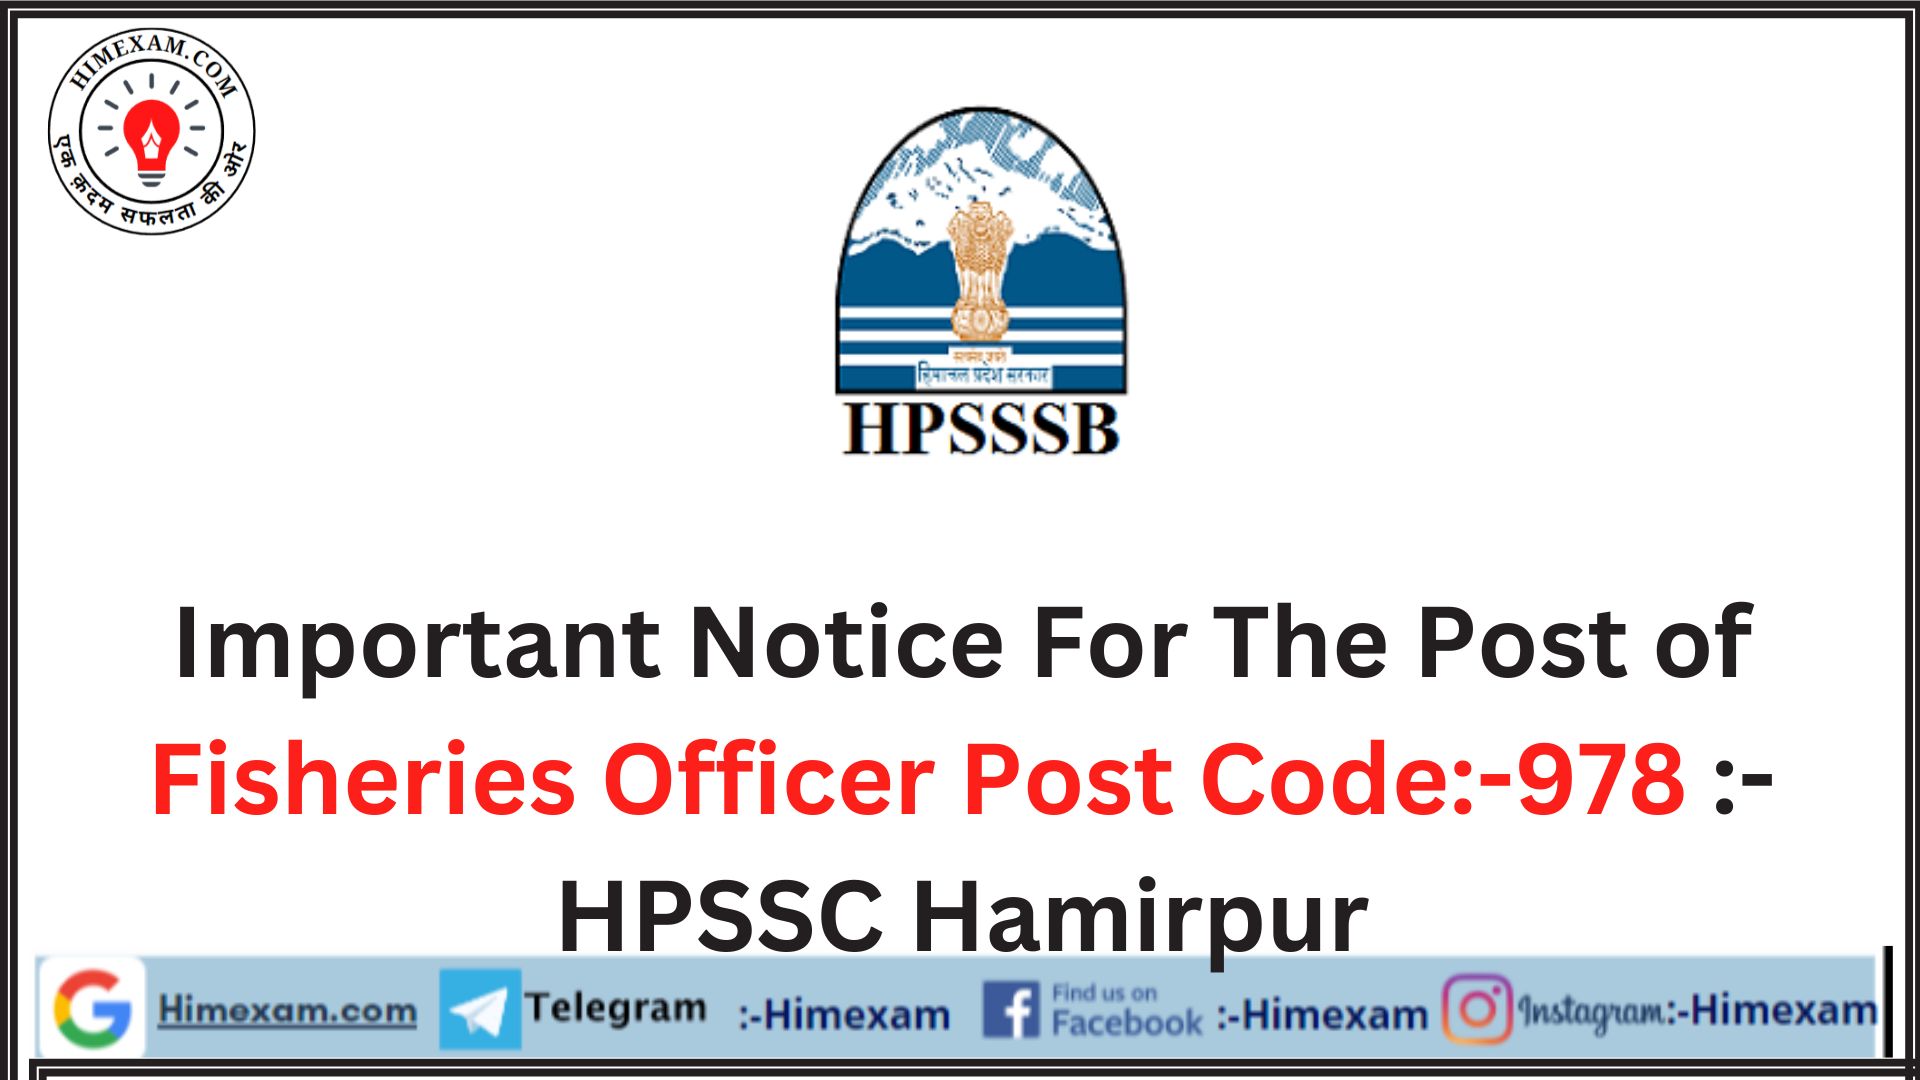 Important Notice For The Post of Fisheries Officer Post Code:-978 :-HPSSC Hamirpur